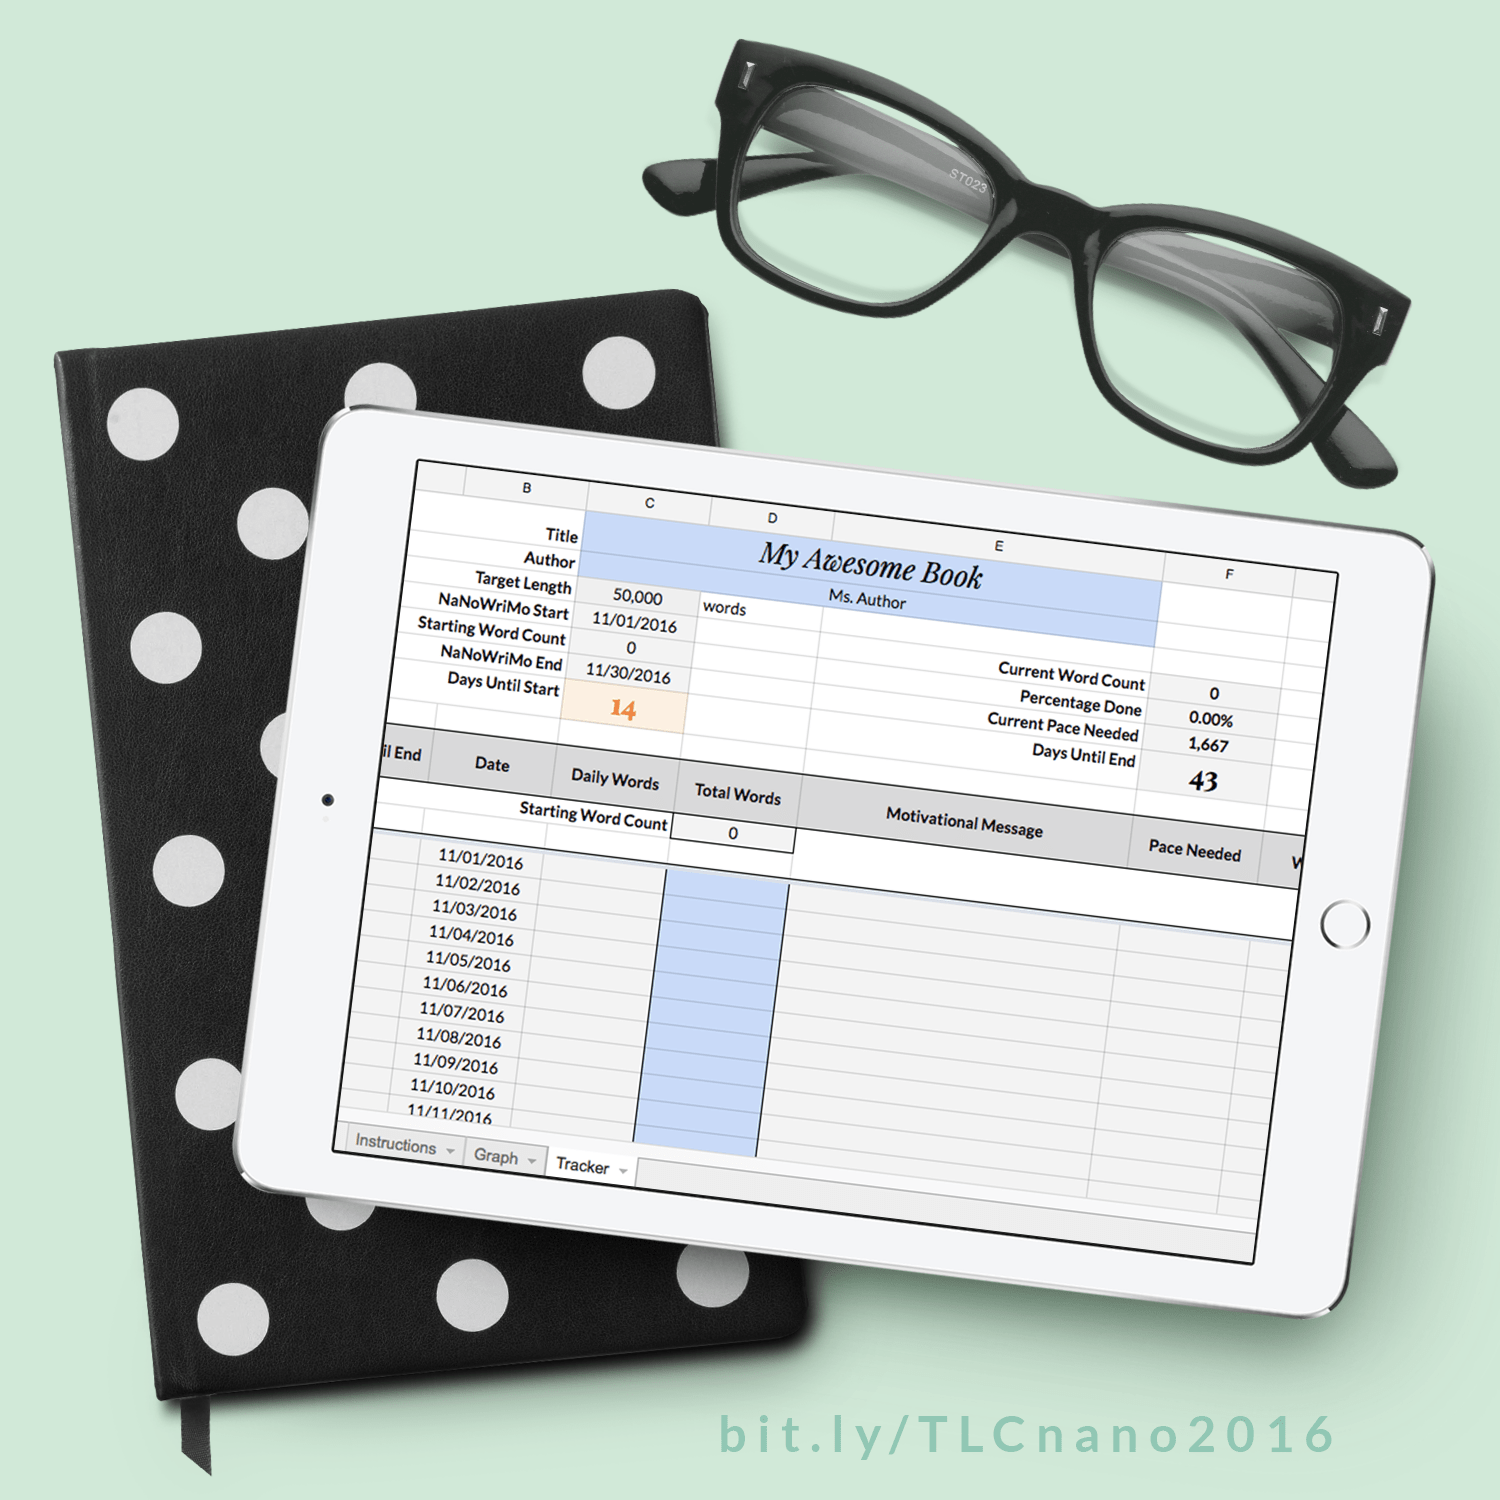 Free digital NaNoWriMo 2016 Word Count Tracker from Tera Lynn Childs.